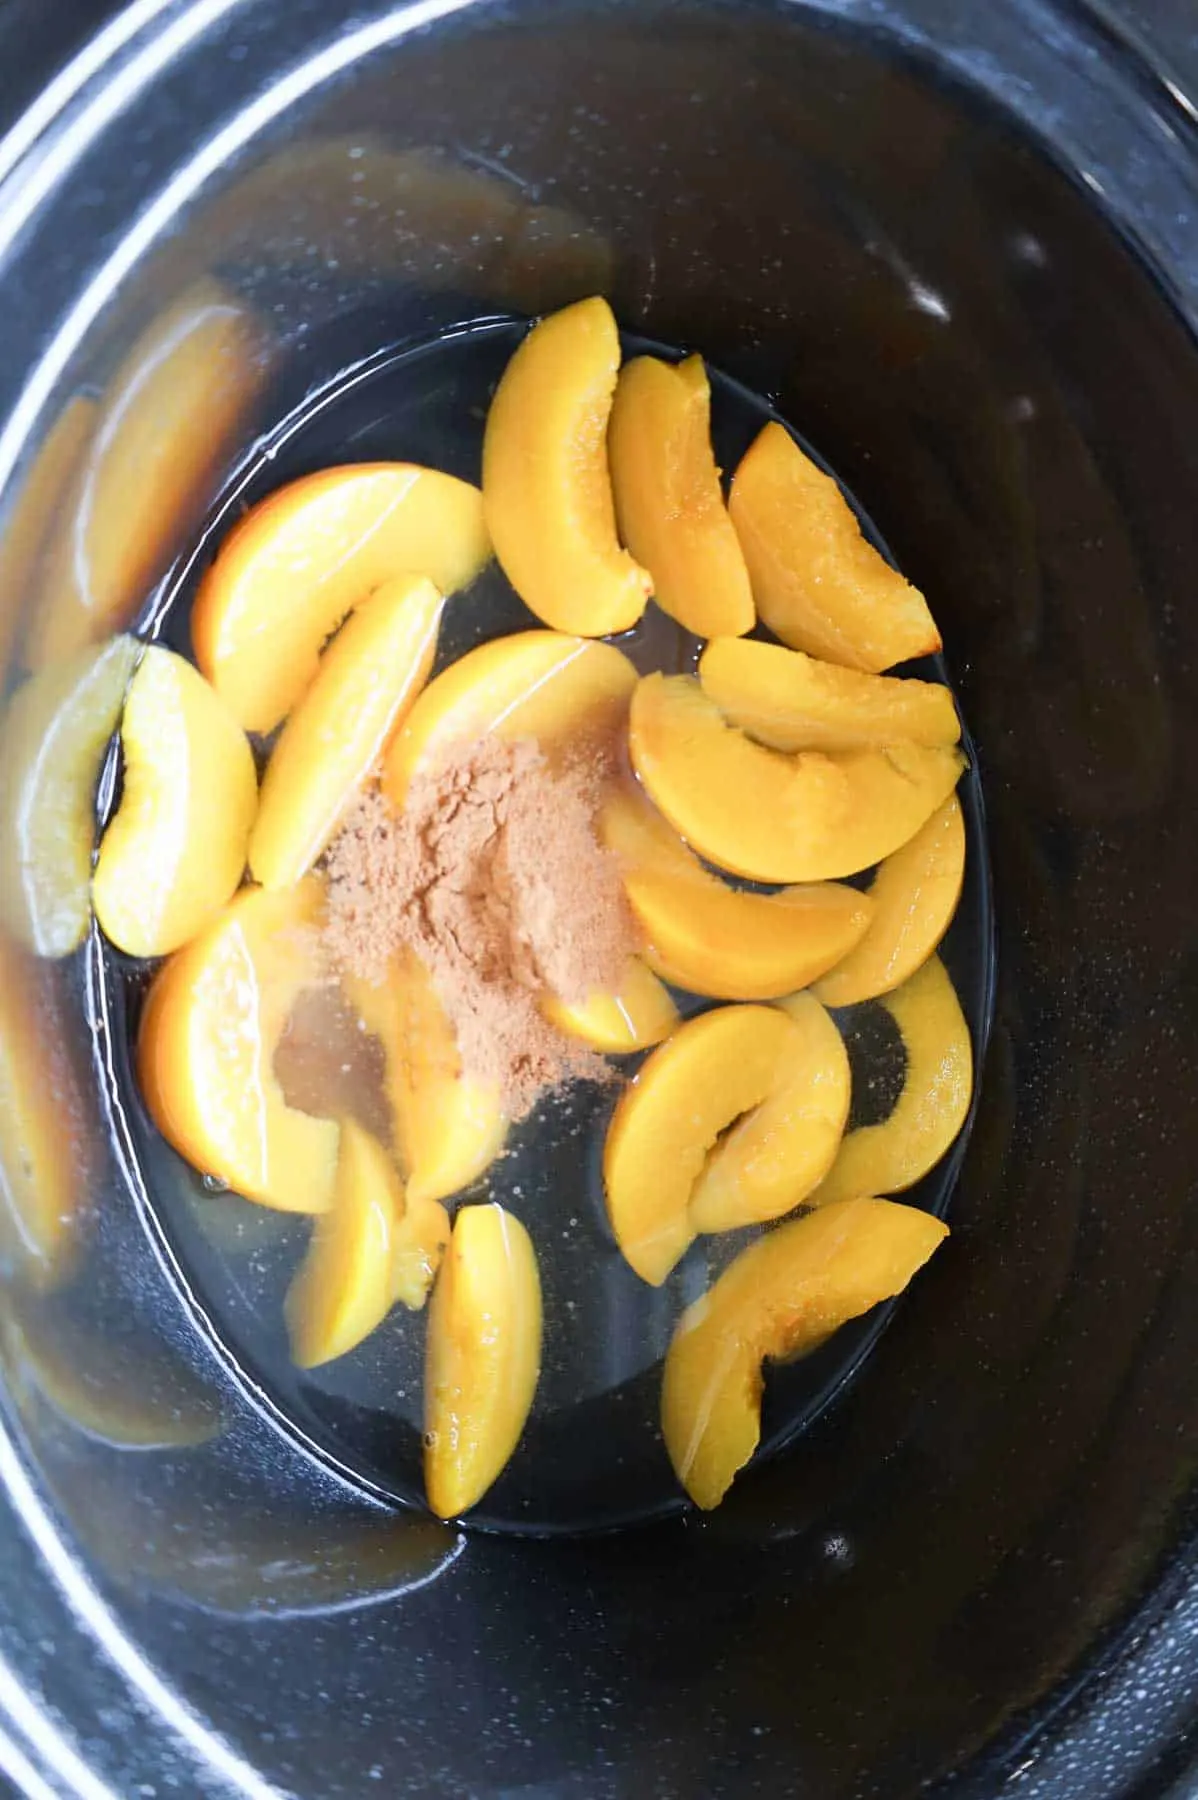 cinnamon on top of canned peach slices in a crock pot